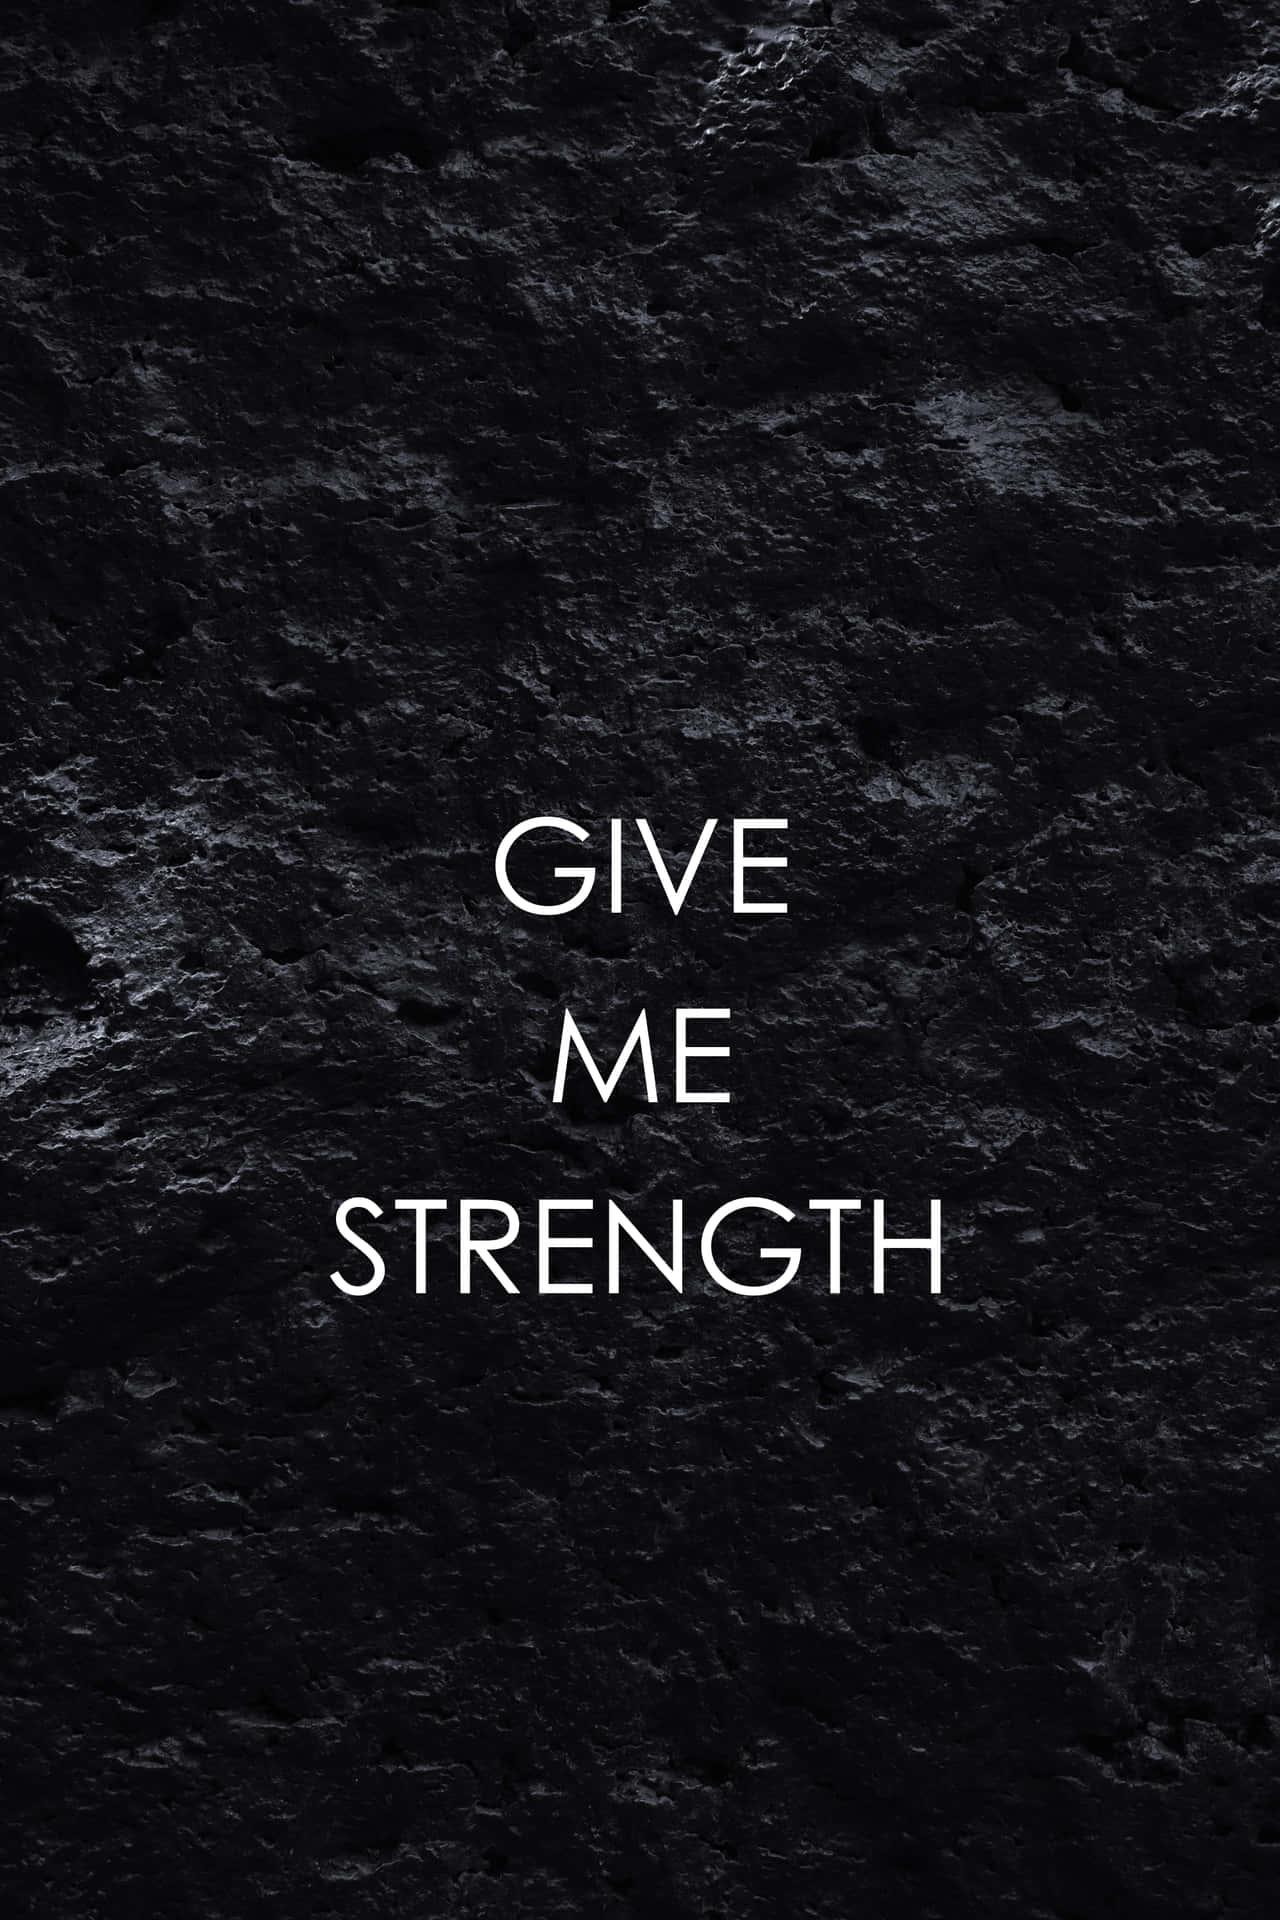 Give Me Strength - A Black And White Photo Wallpaper